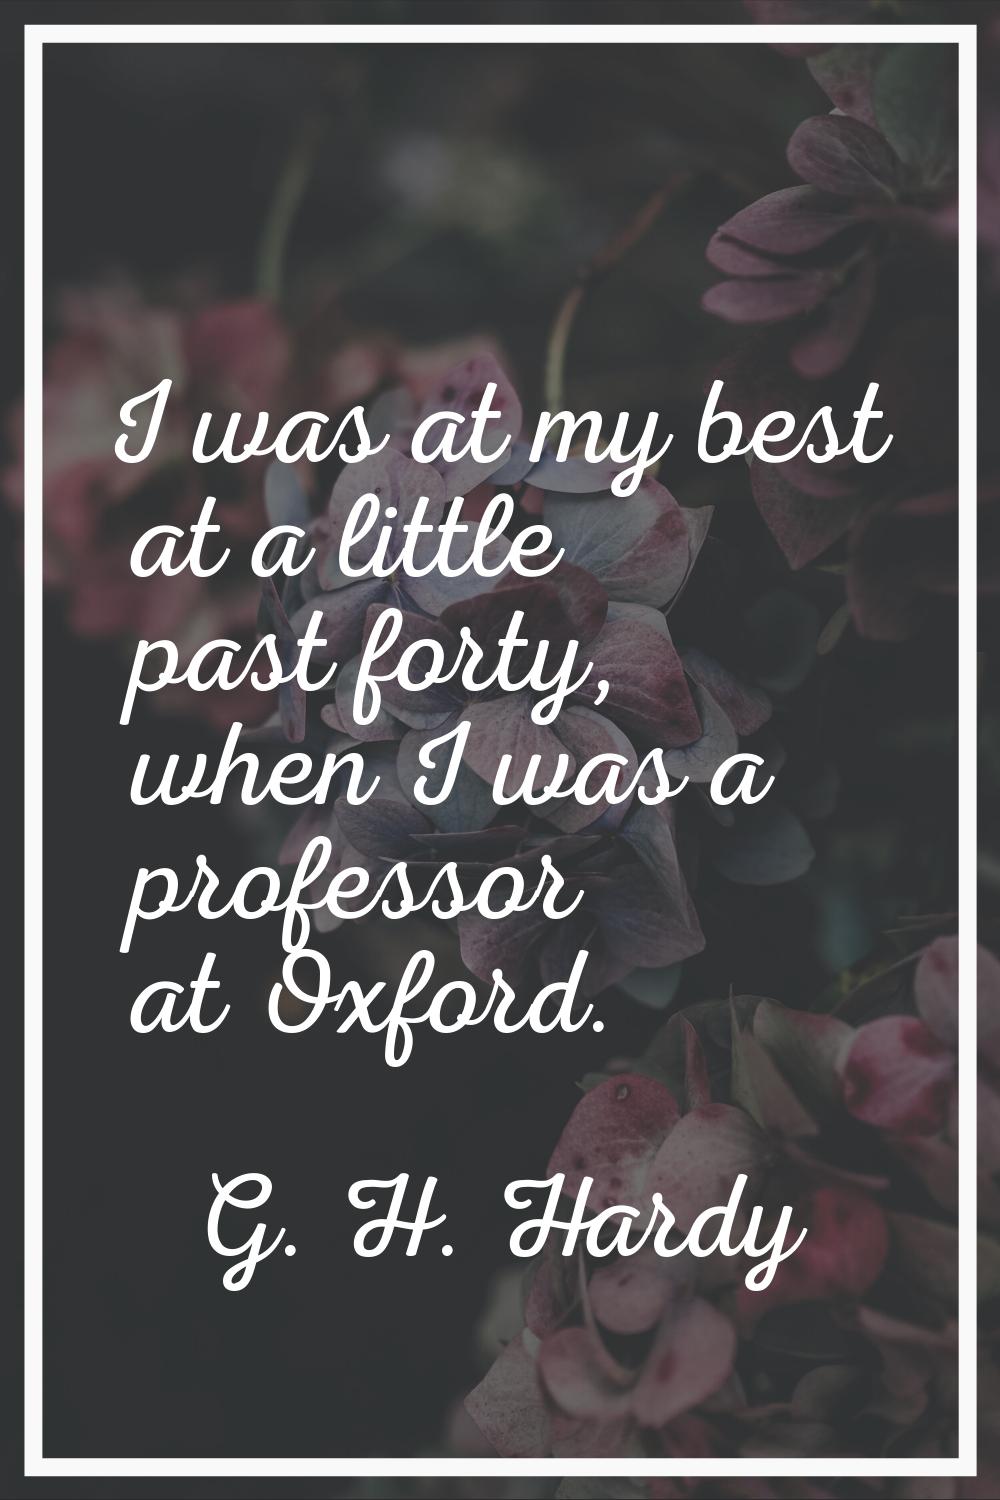 I was at my best at a little past forty, when I was a professor at Oxford.